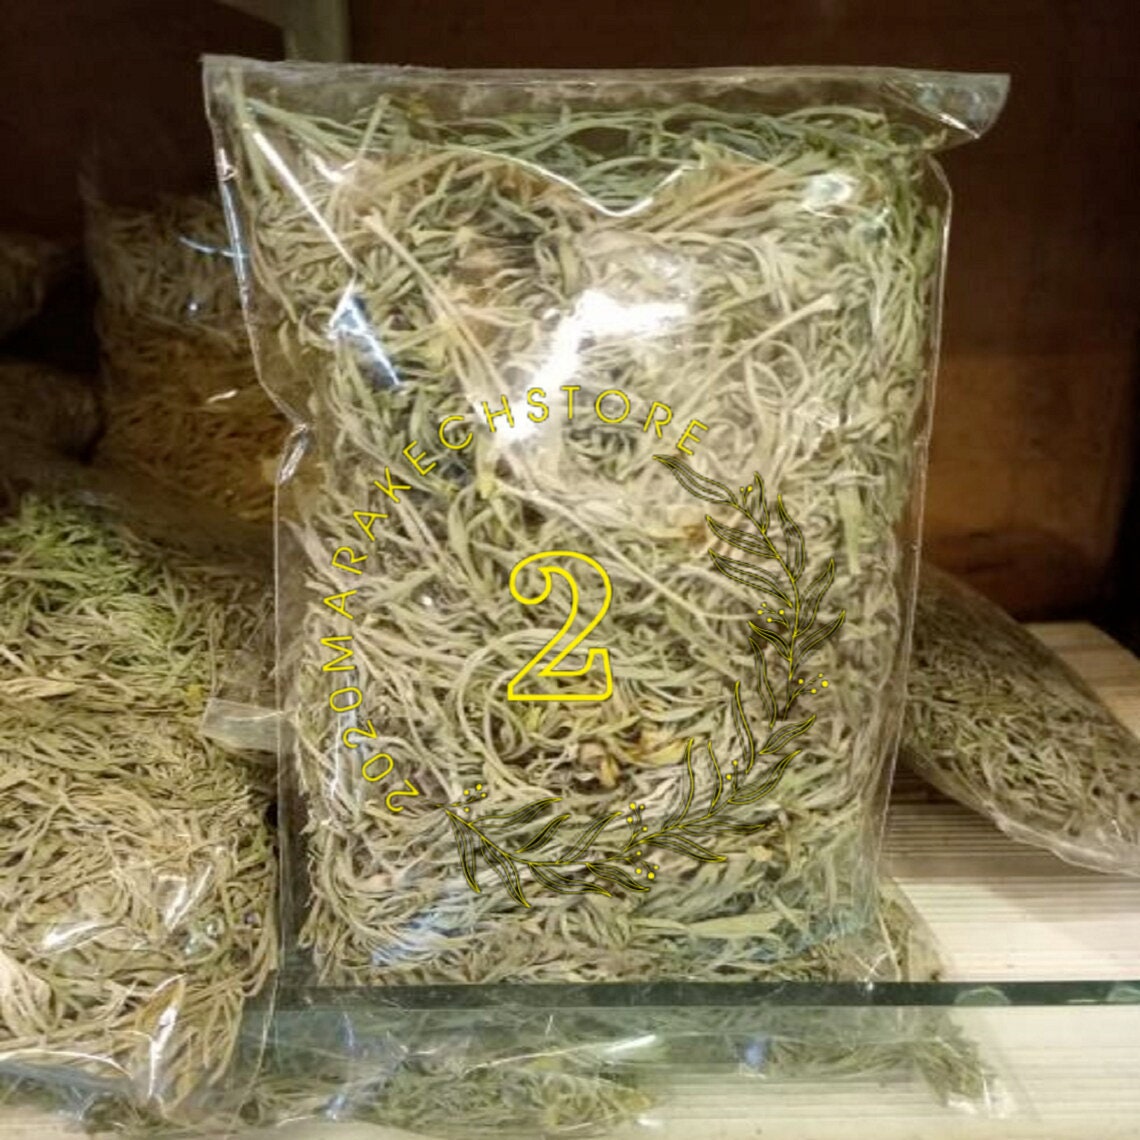 Premium Quality Dried Rose Buds From Morocco 